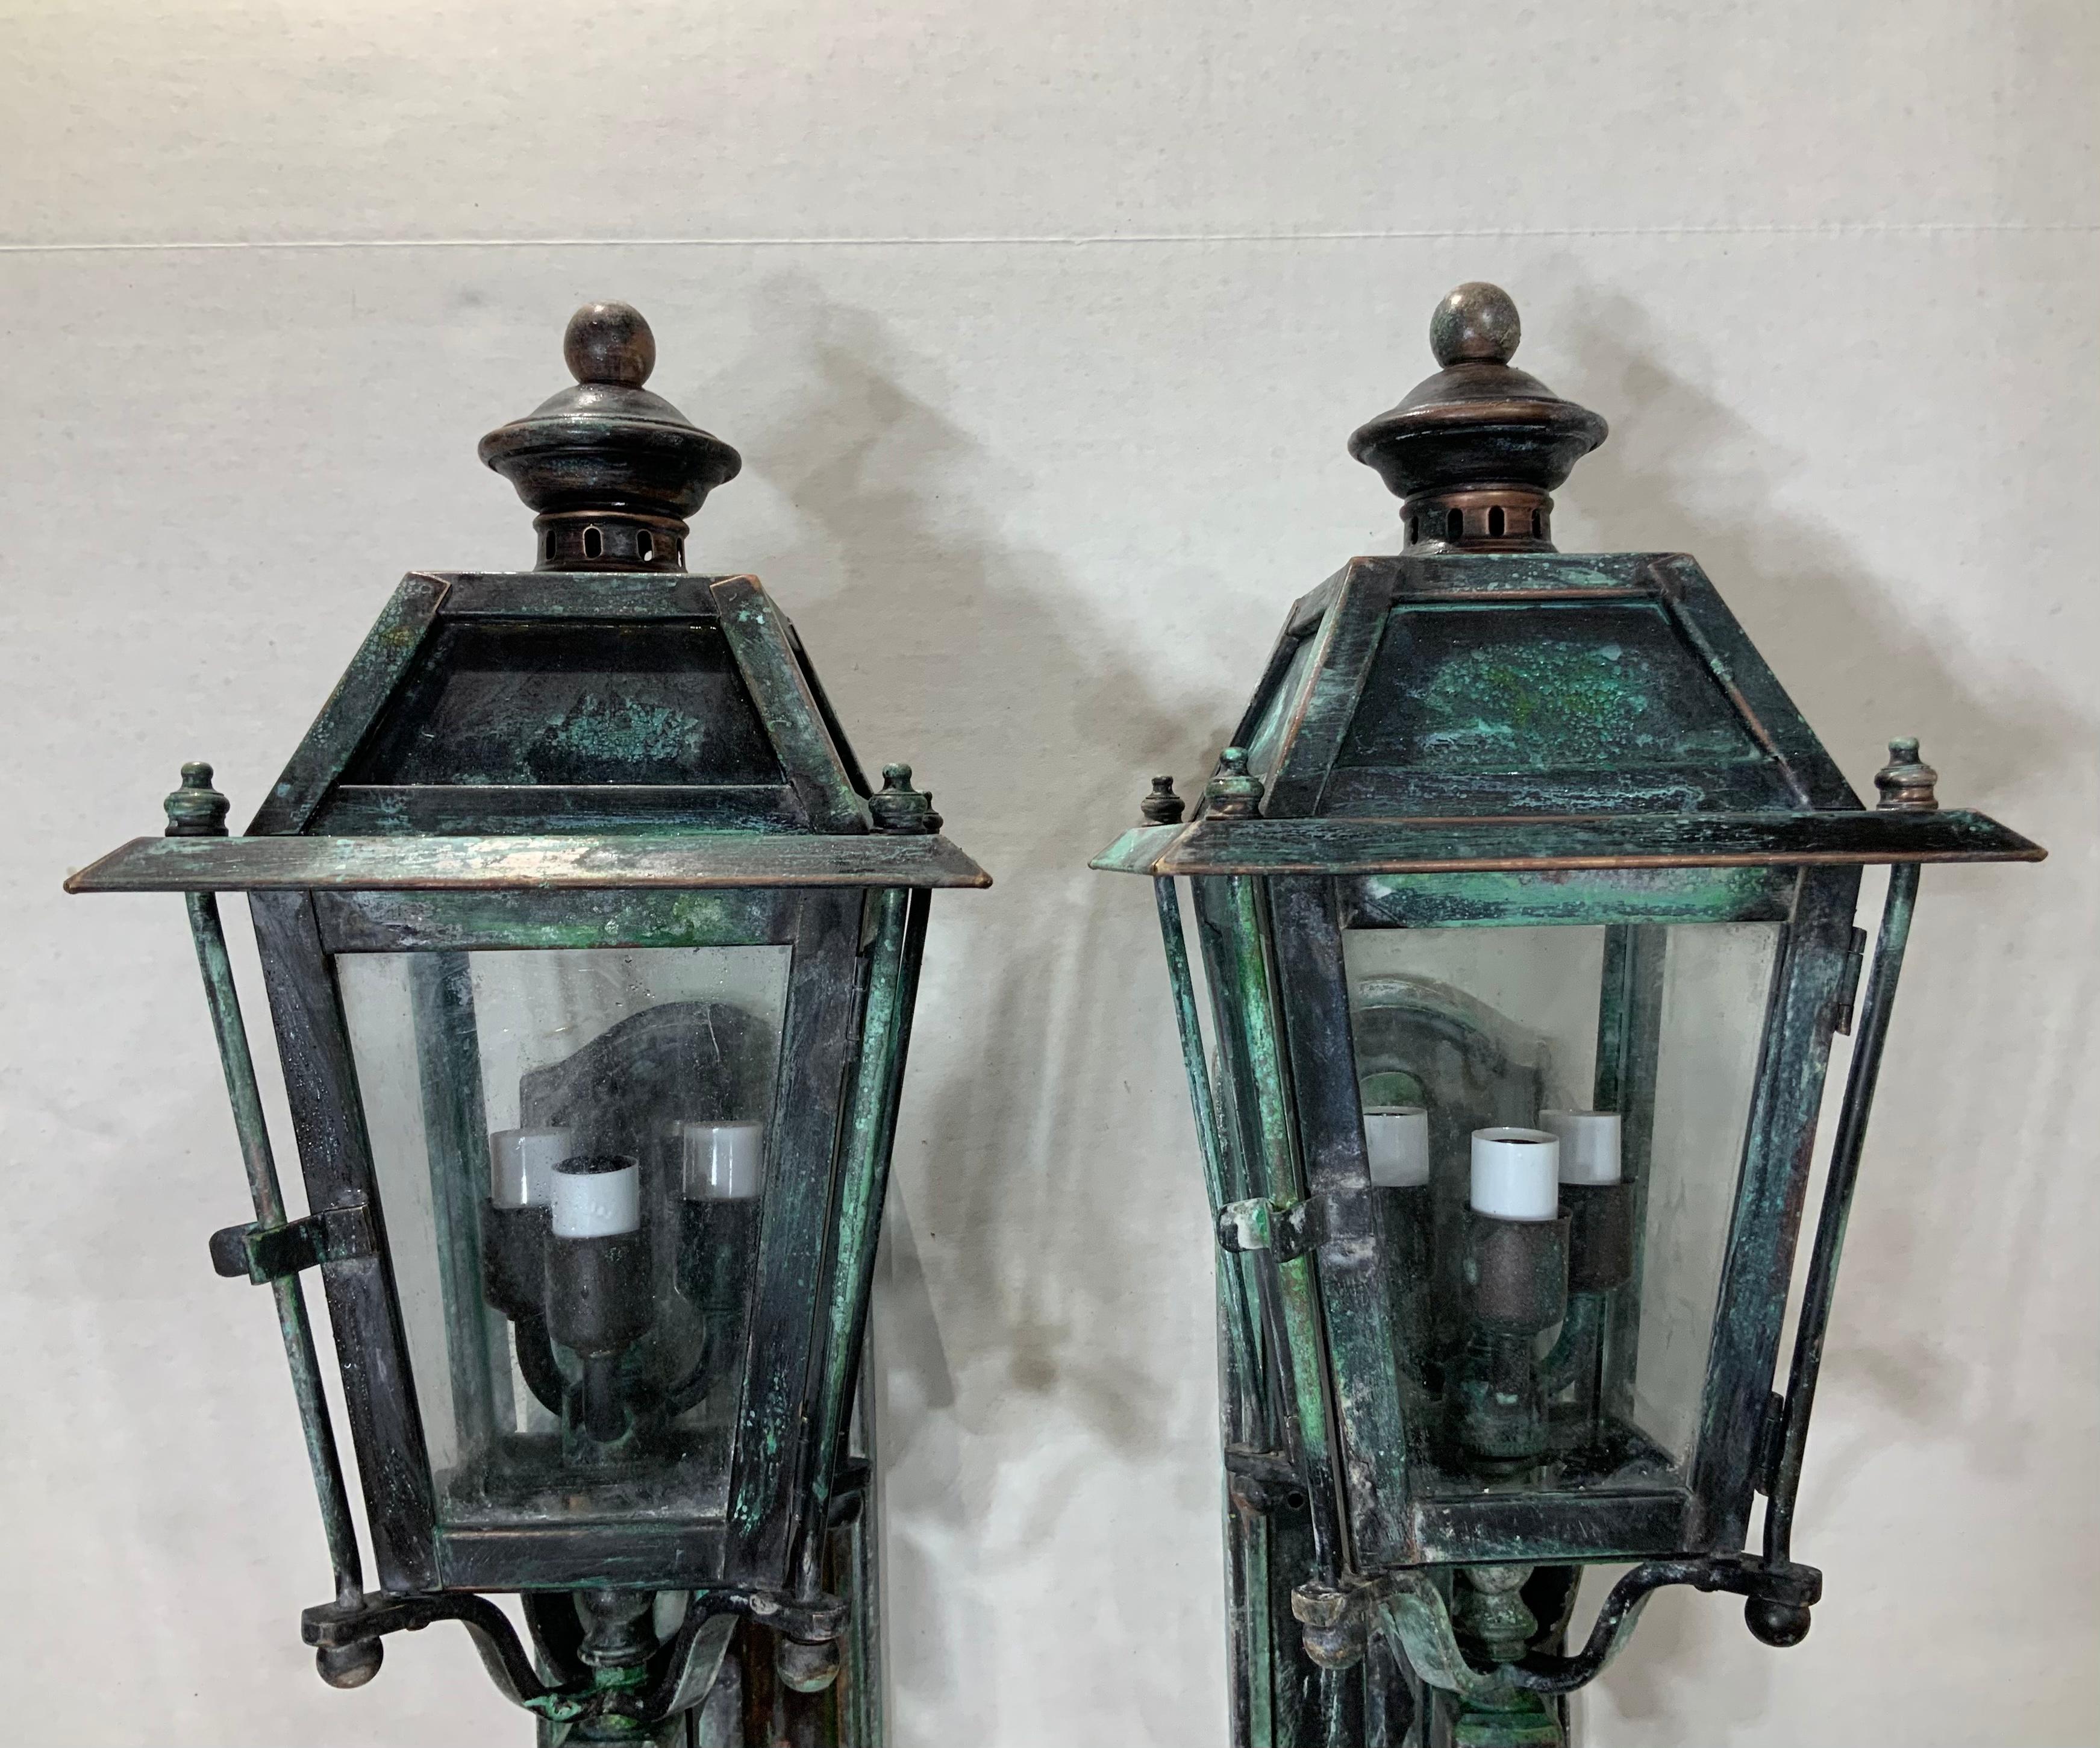 Pair of decorative lanterns, handcrafted from solid brass, electrified with 3 40/watt light each, UL approved, up to US code, suitable for wet locations. Very impressive pair for the front of the house. Some light green oxidization patina.